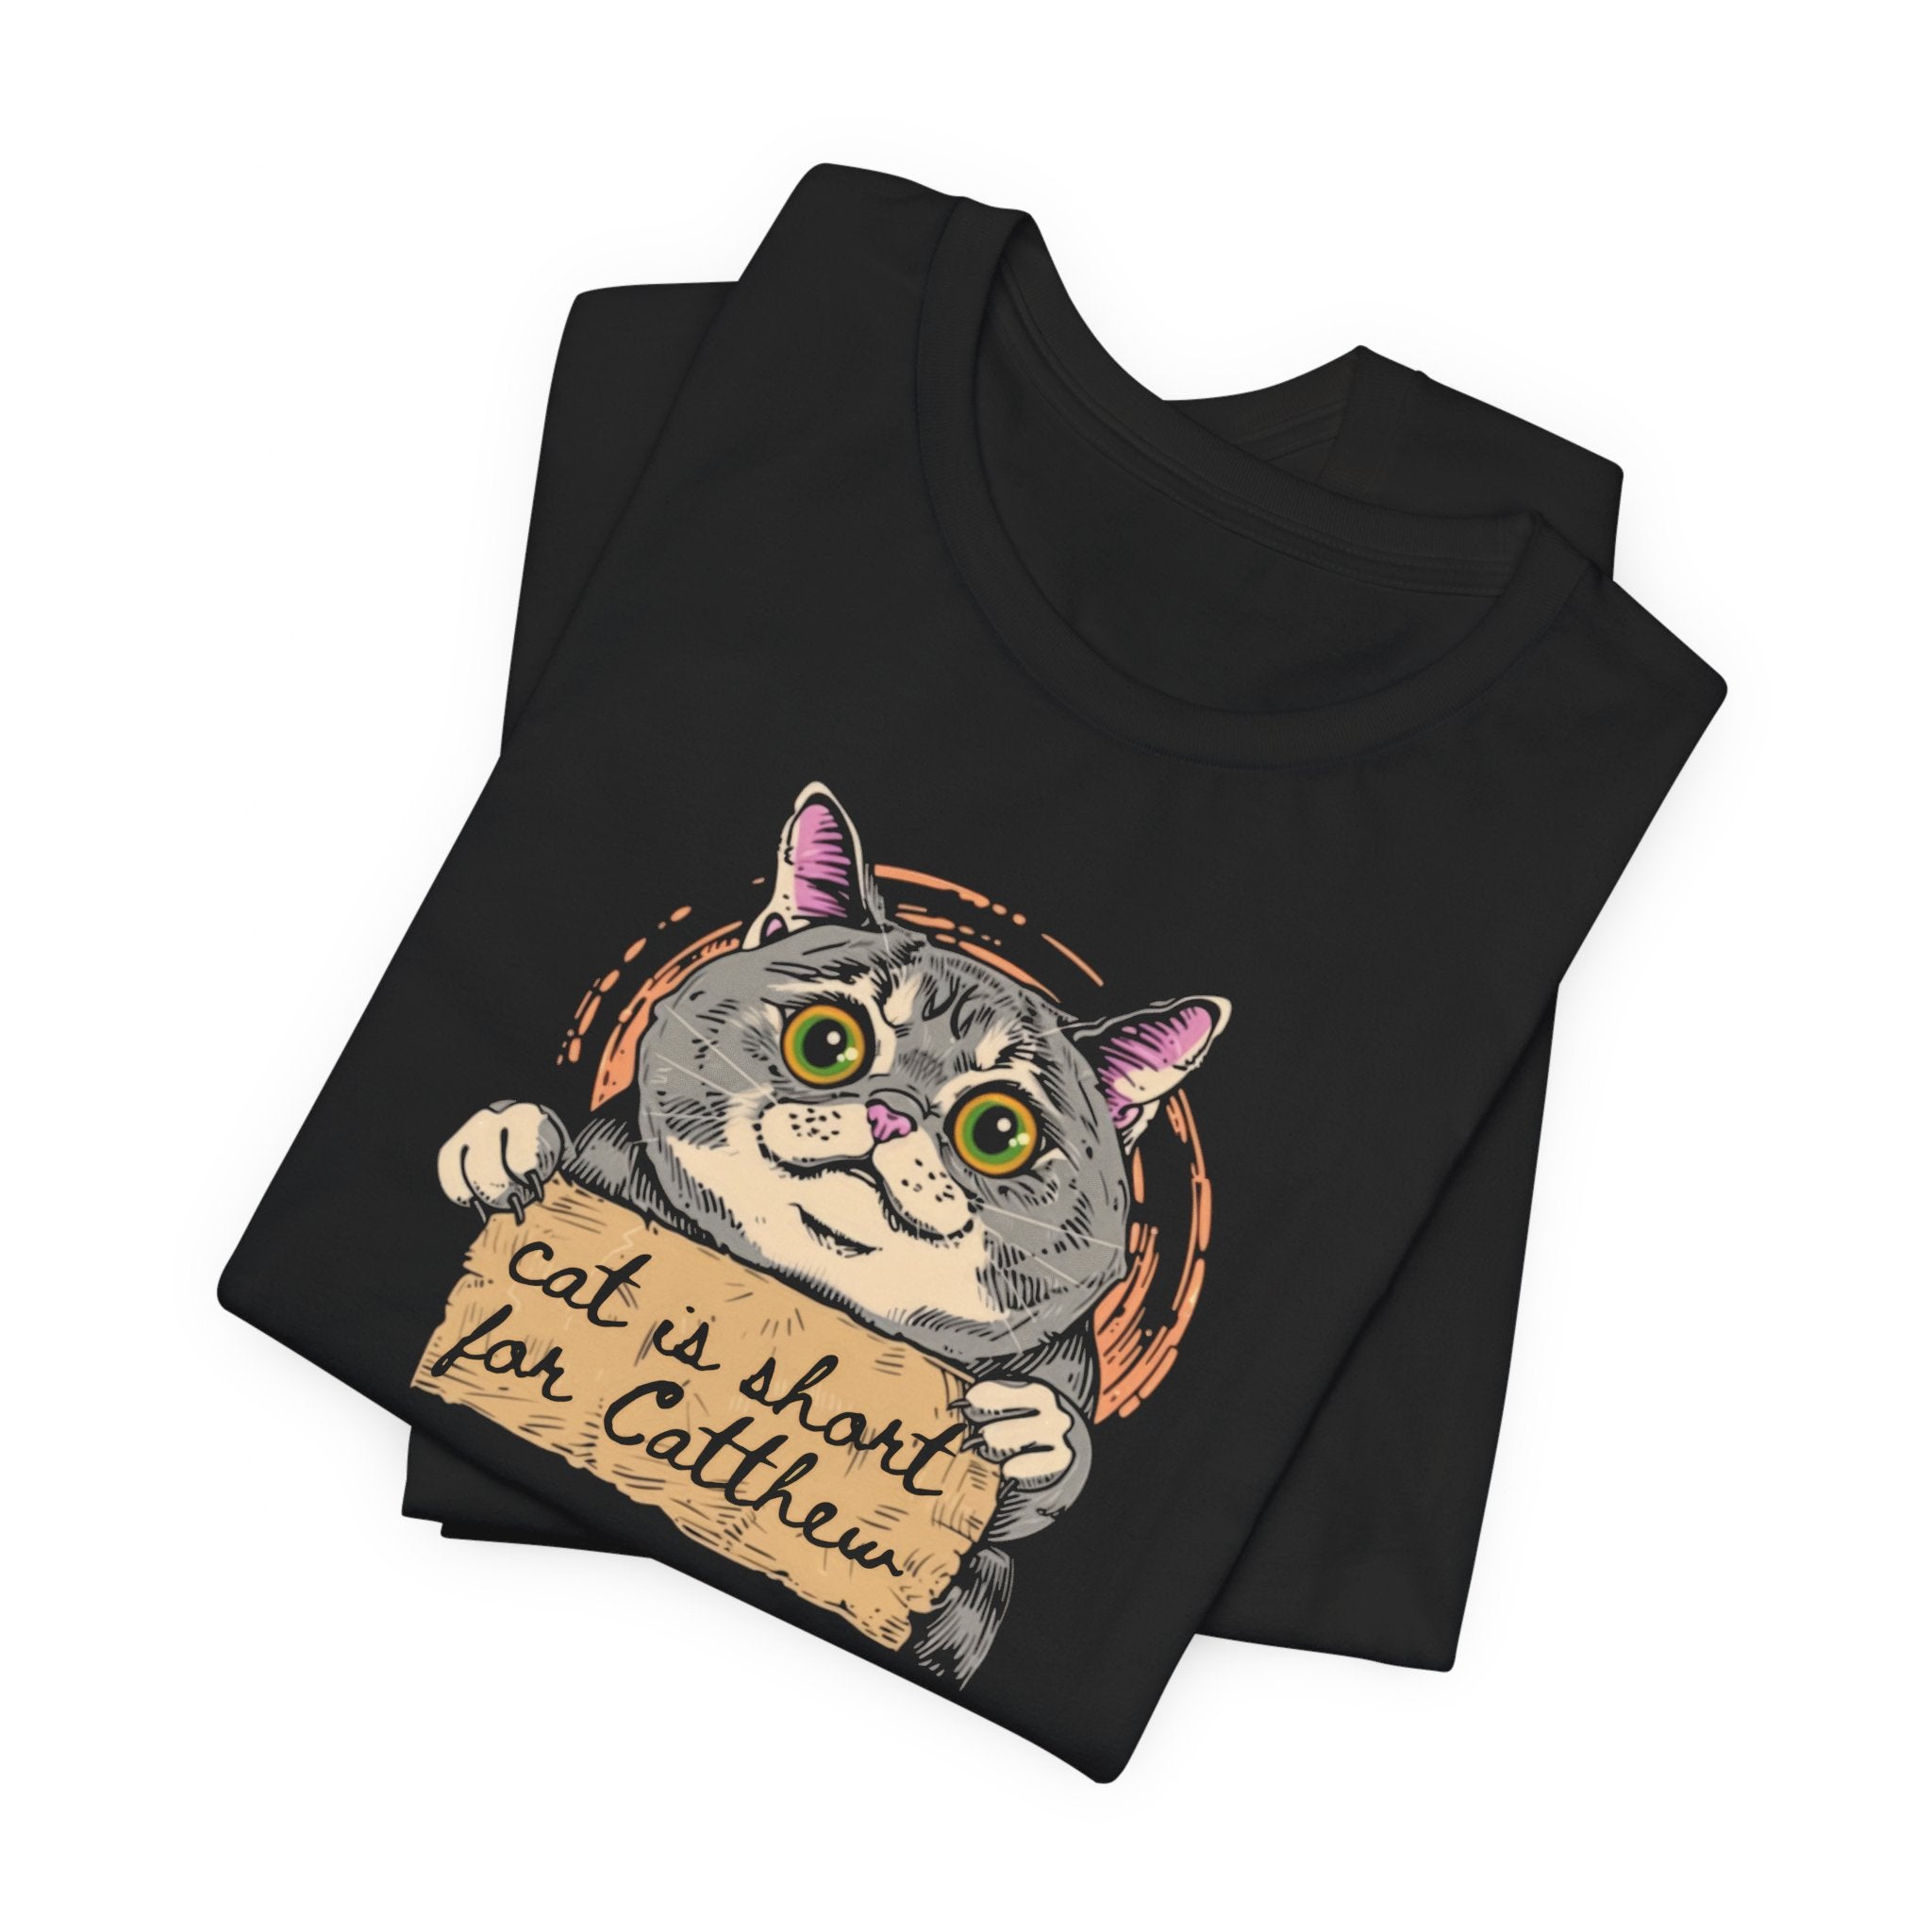 Cat is Short for Catthew Funny Cat Shirt